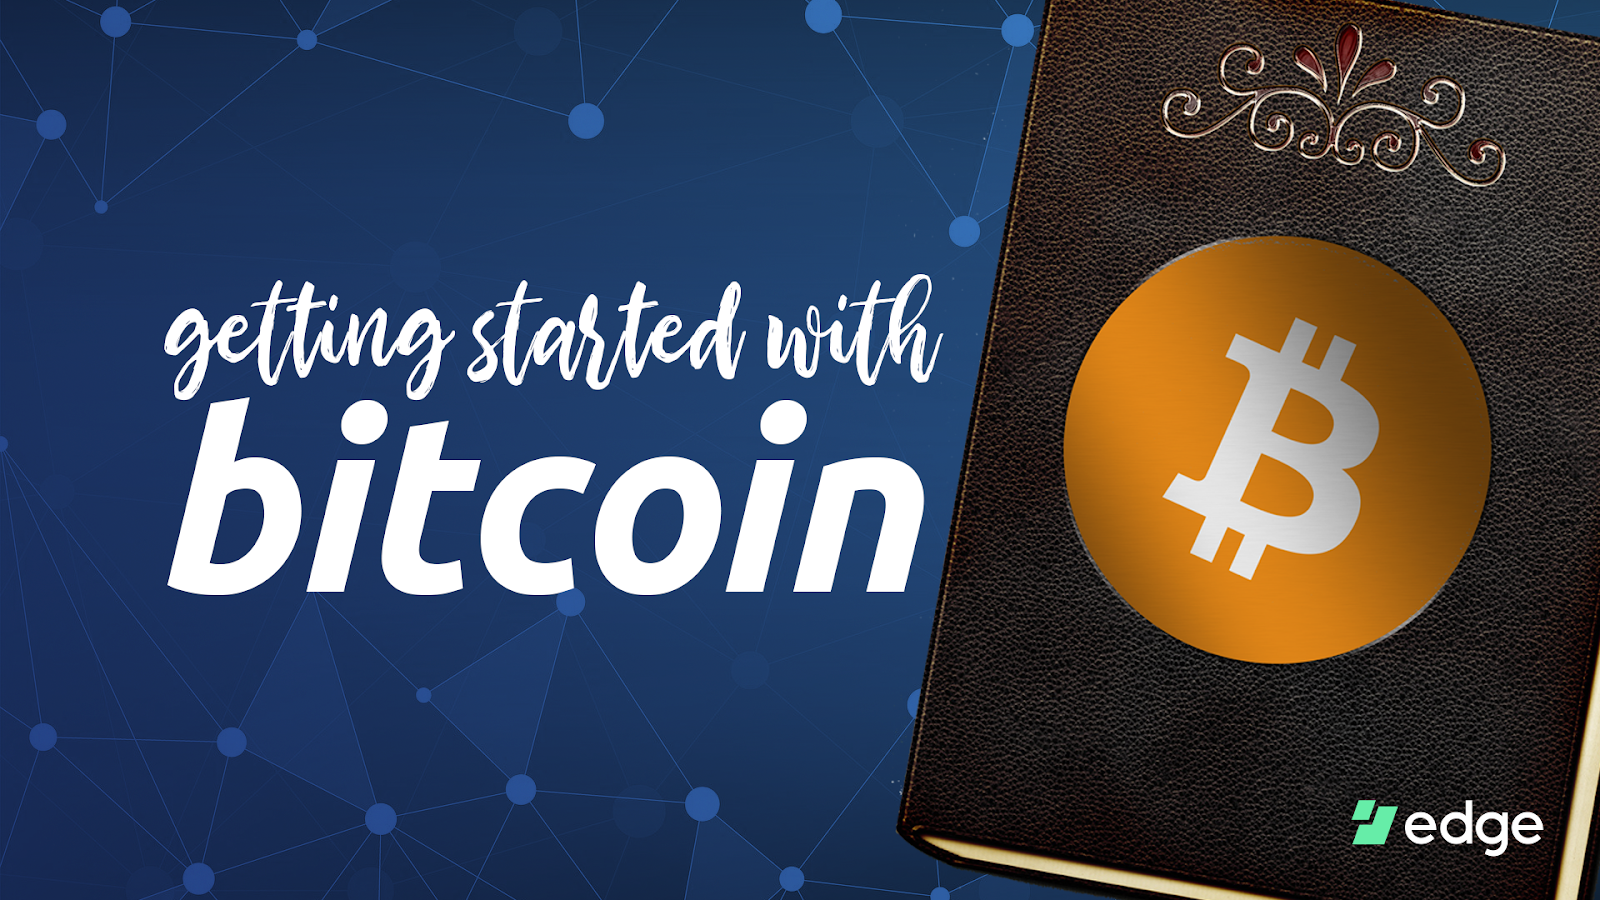 Getting started with Bitcoin